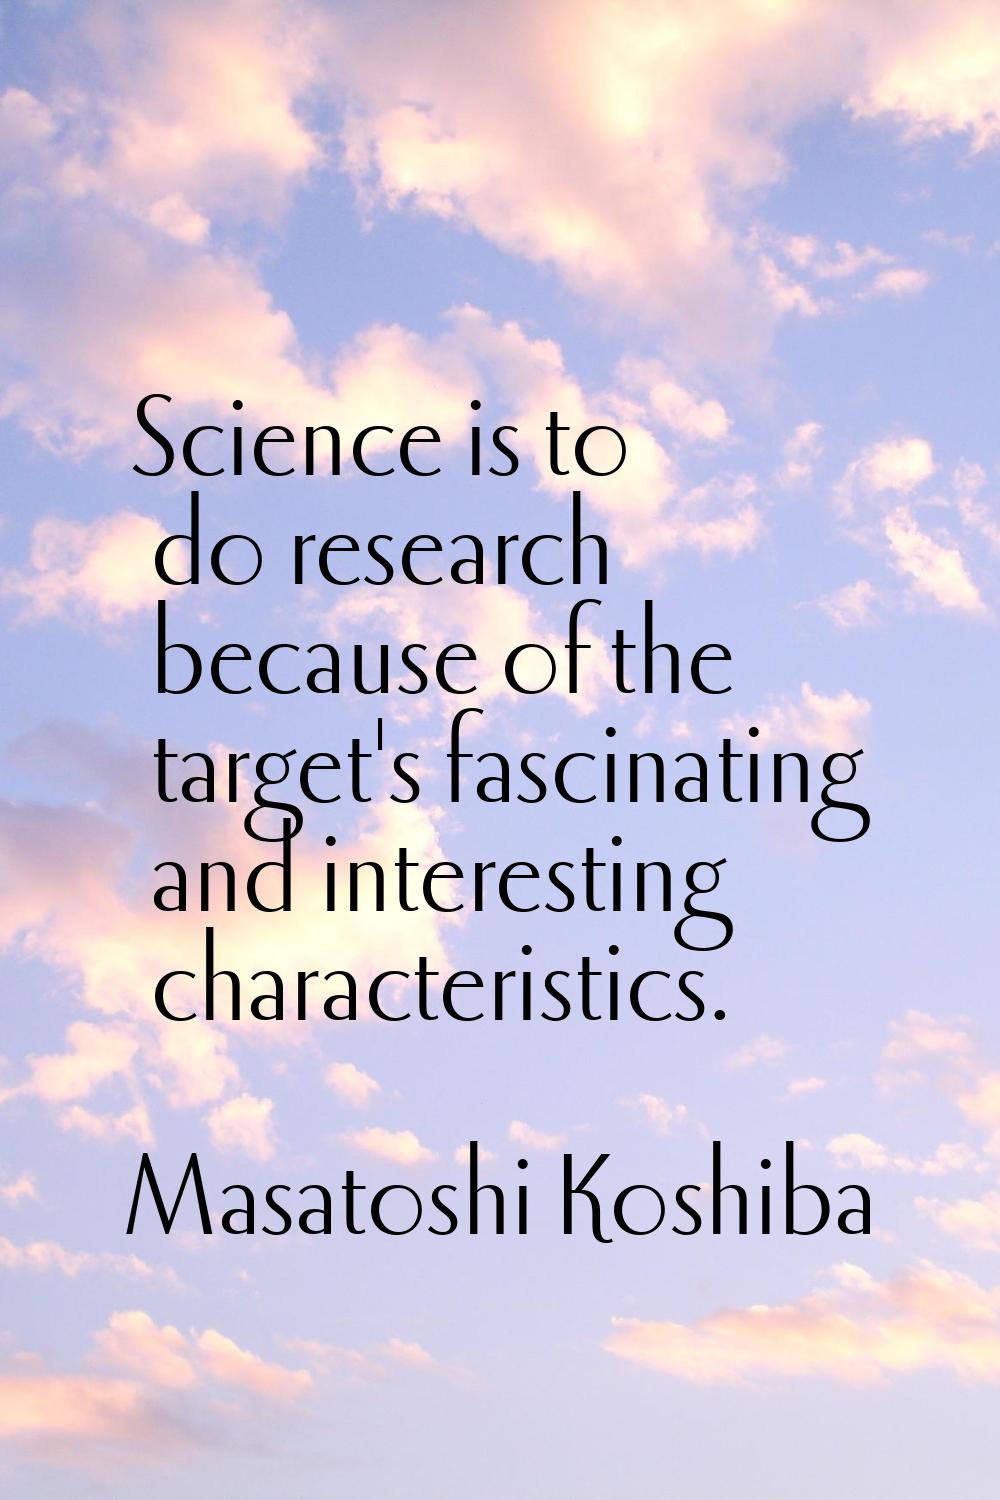 Science is to do research because of the target's fascinating and interesting characteristics.